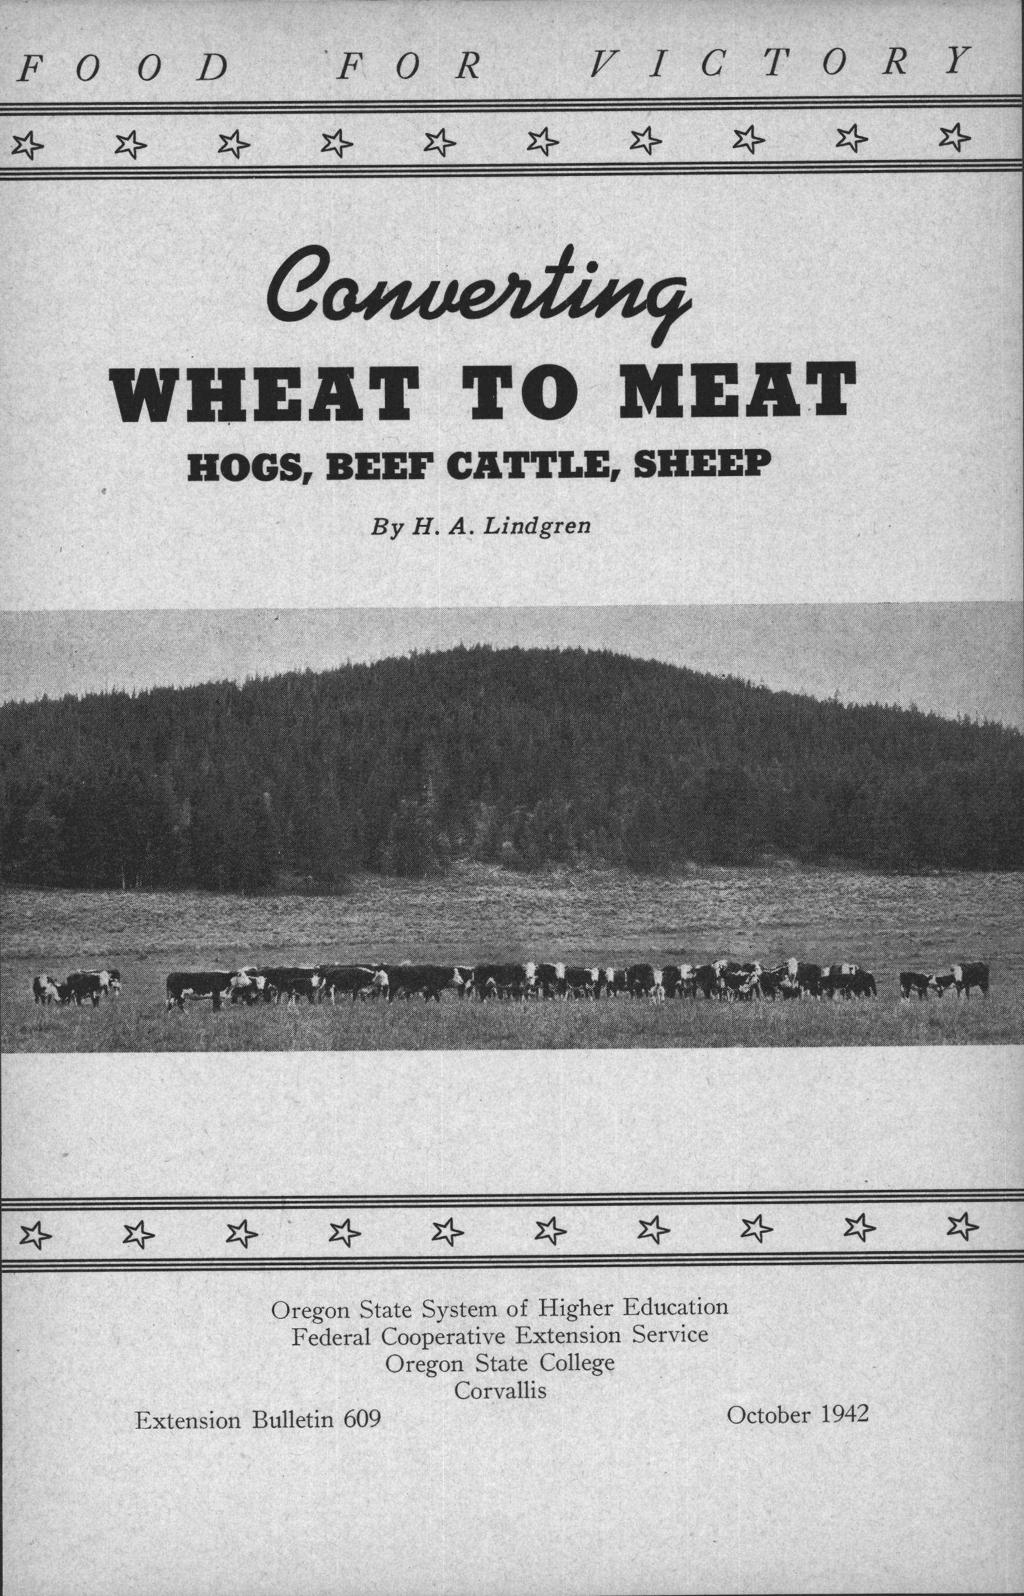 FOOD FOR VICTORY * * * * * * * * * * - WHEAT TO MEAT HOGS, BEEF CATTLE, SHEEP By H. A.